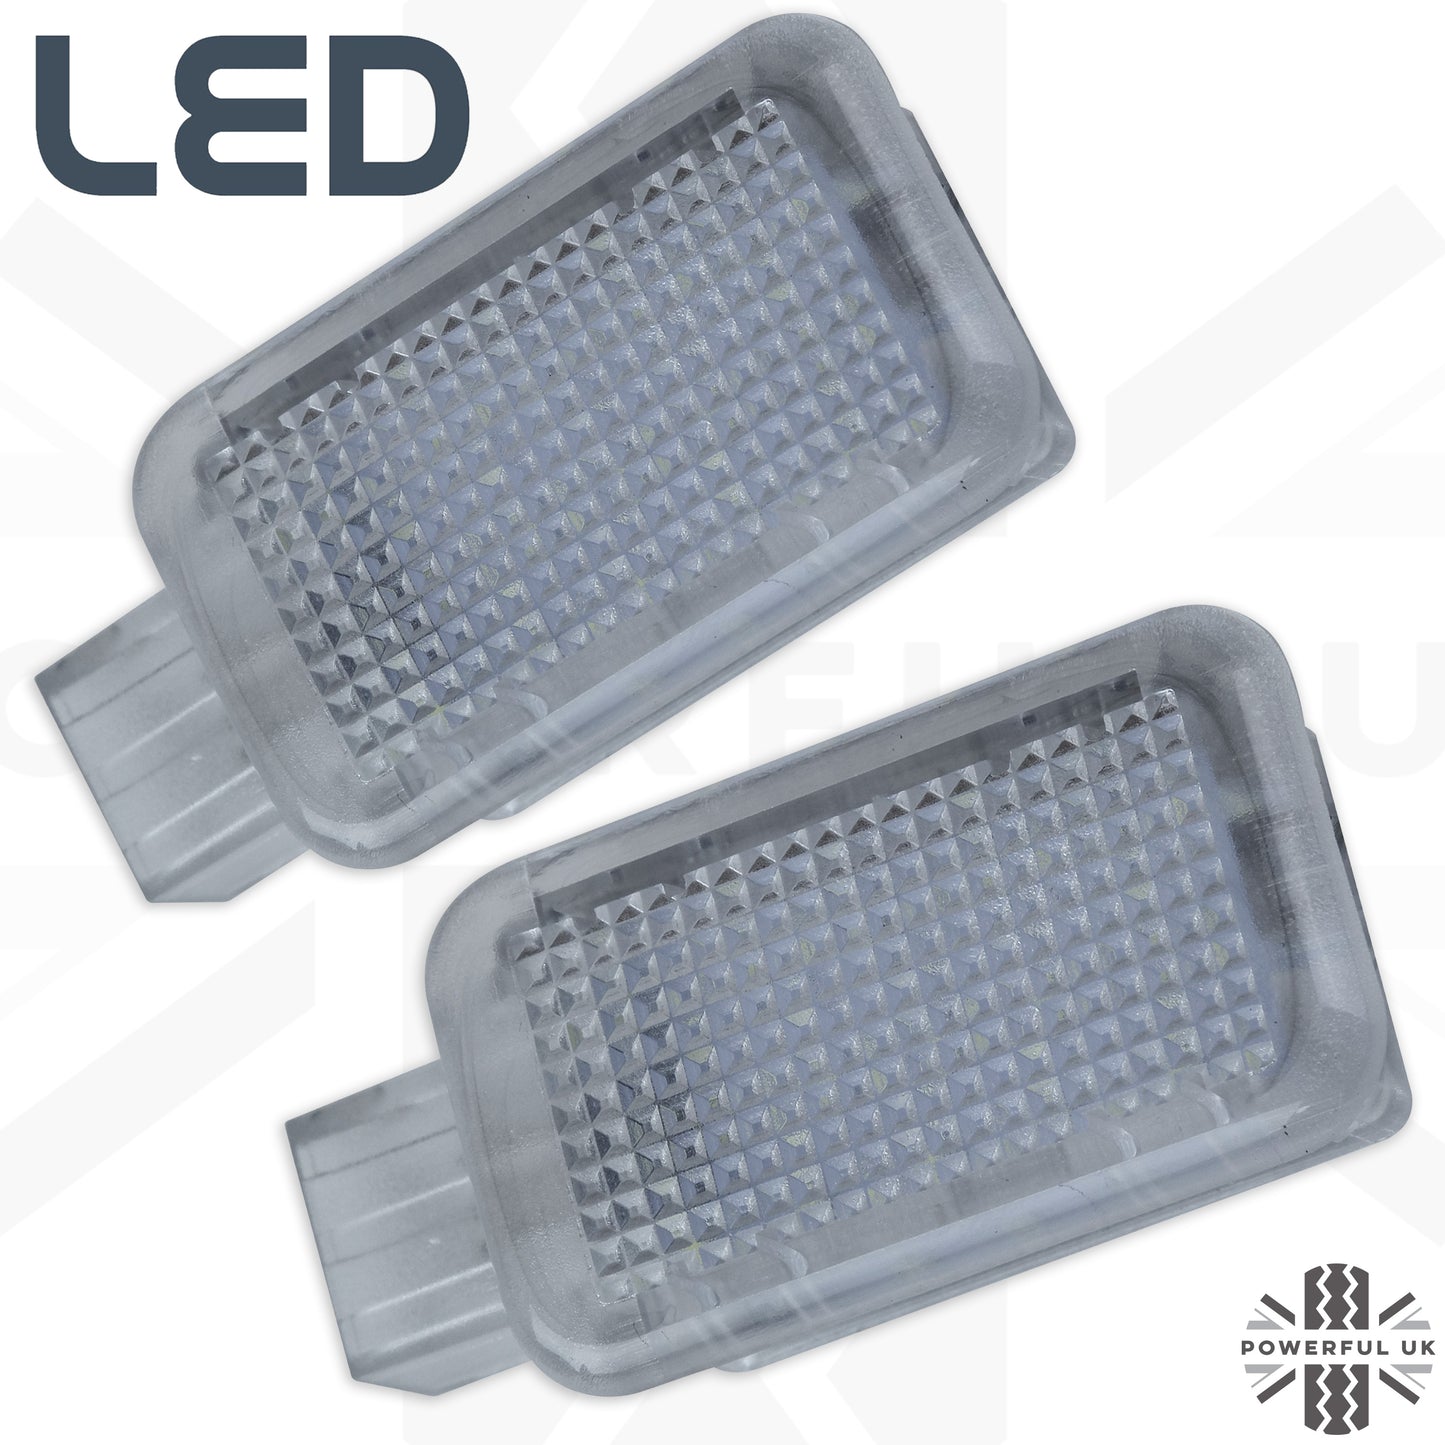 WHITE LED interior Footwell lamp upgrade for Range Rover Sport L494  (2pc)